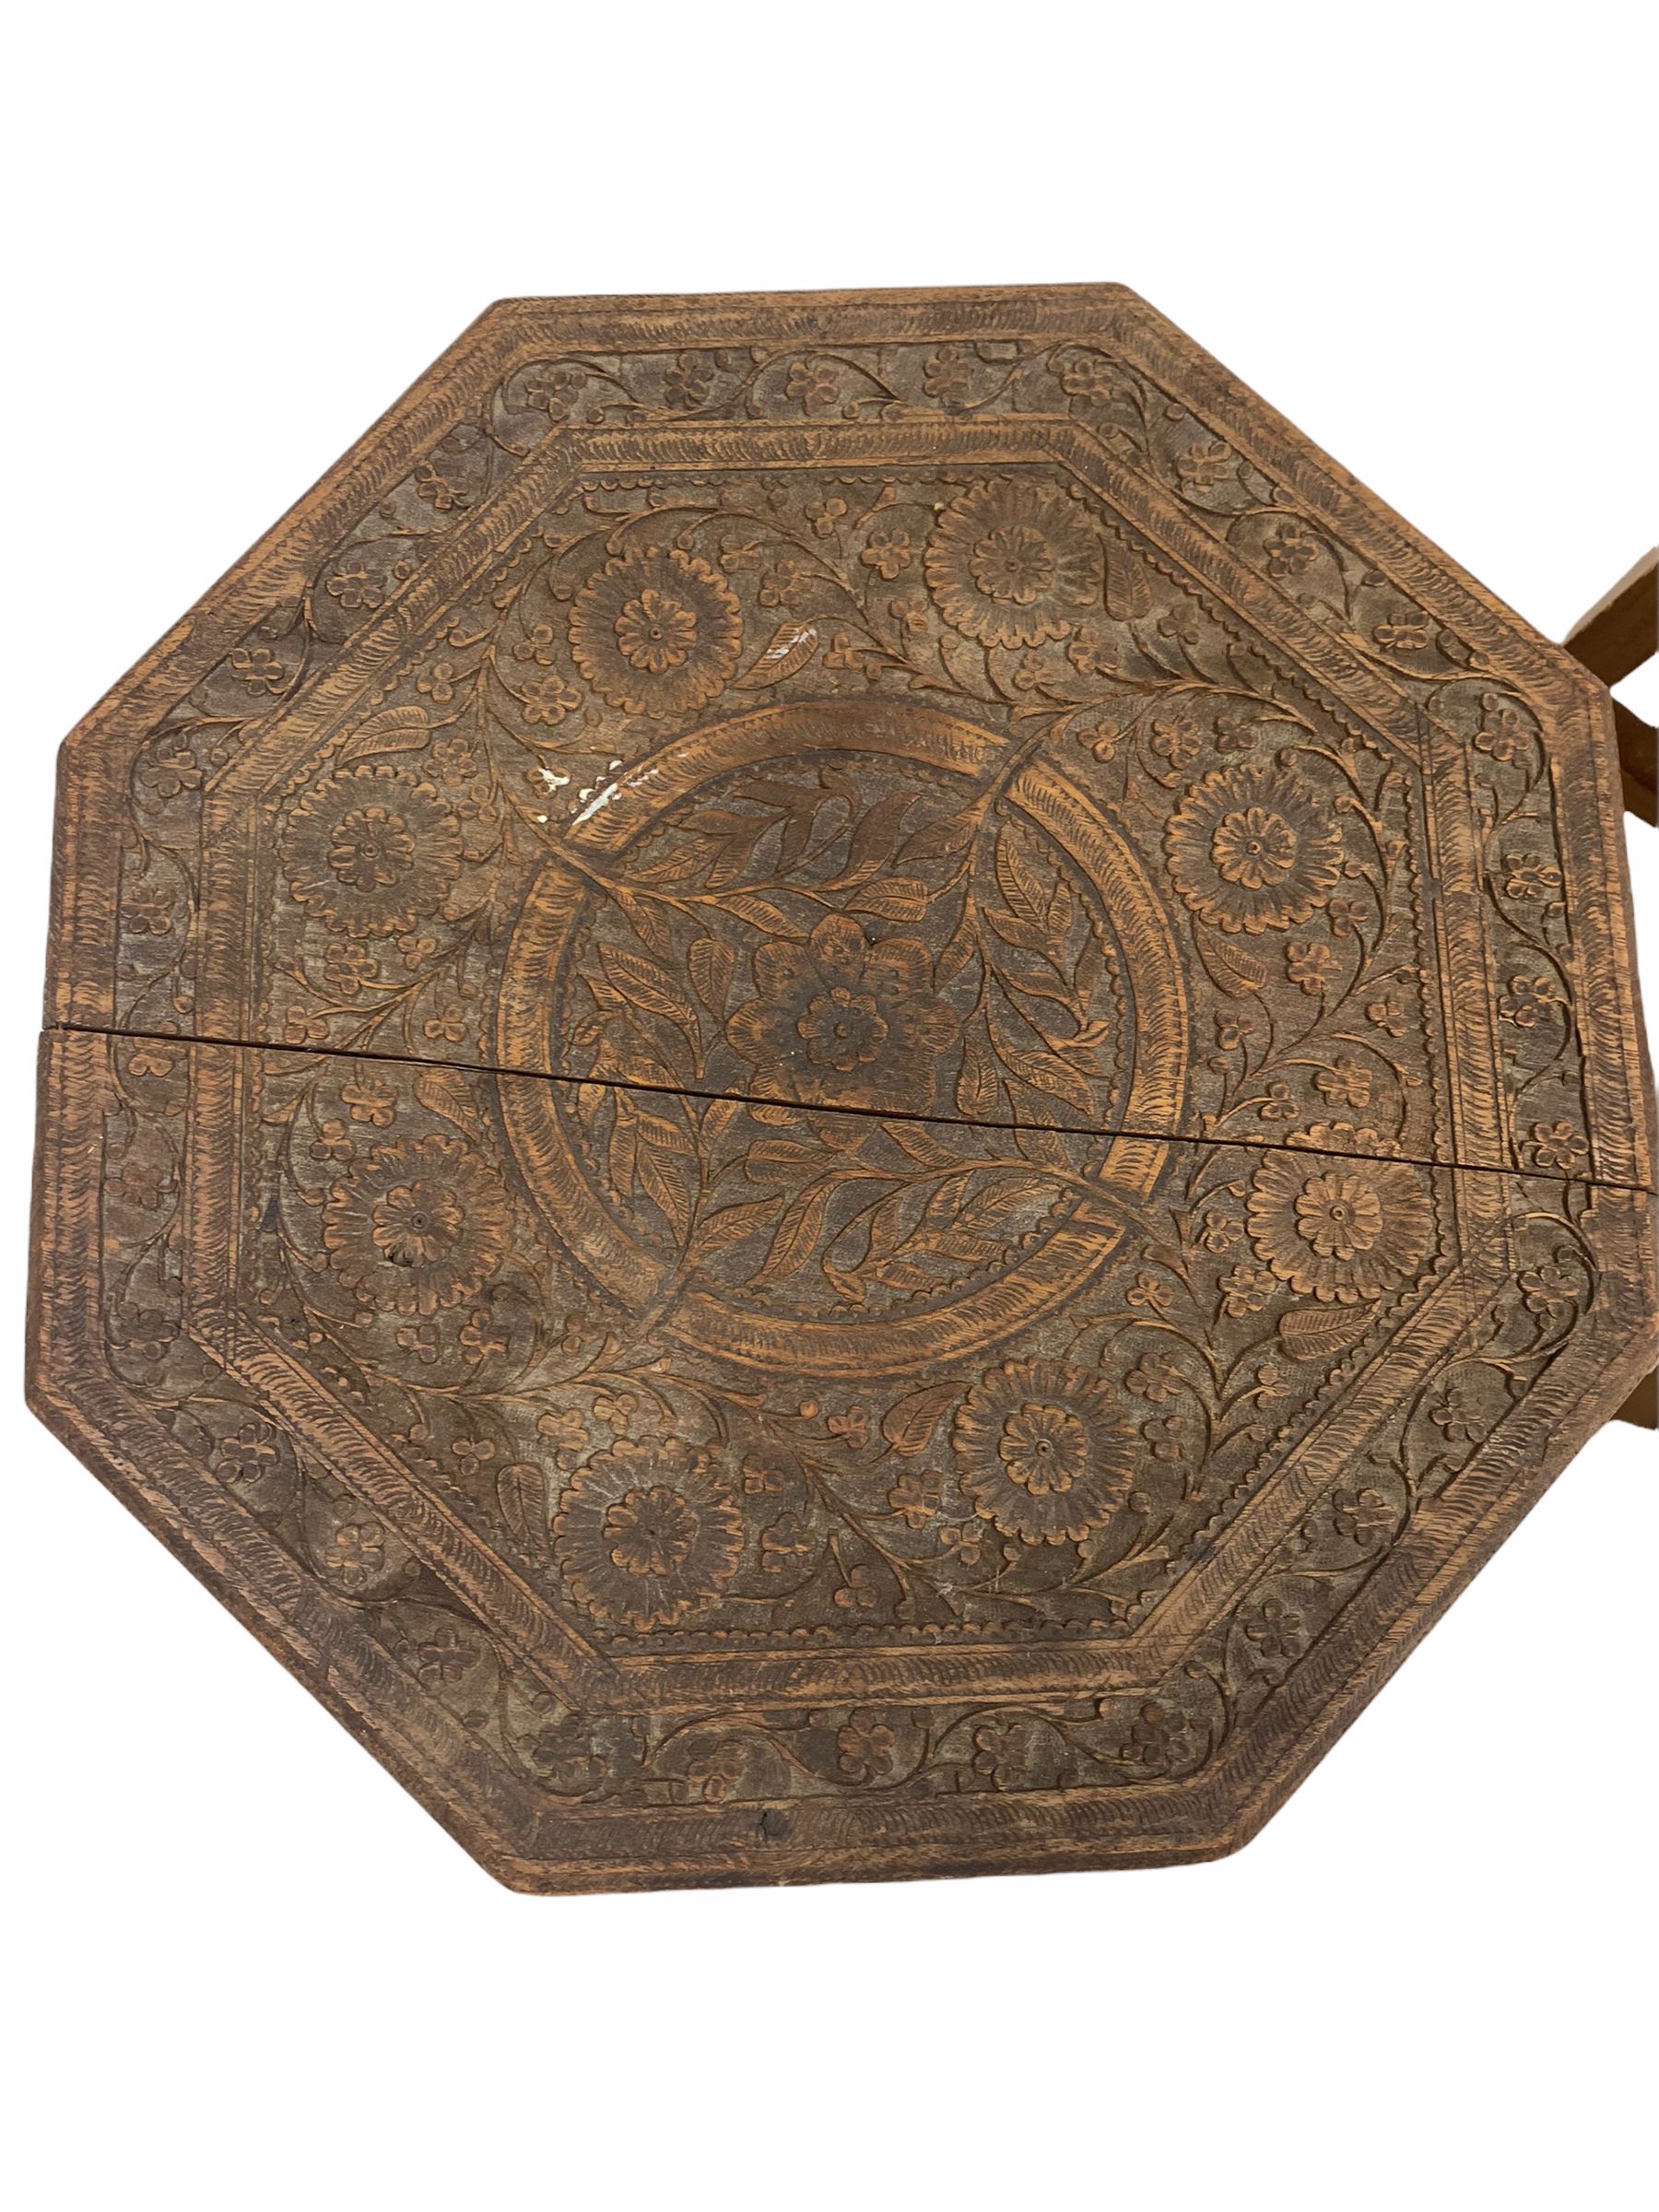 Indian hardwood octagonal occasional table - Image 3 of 3